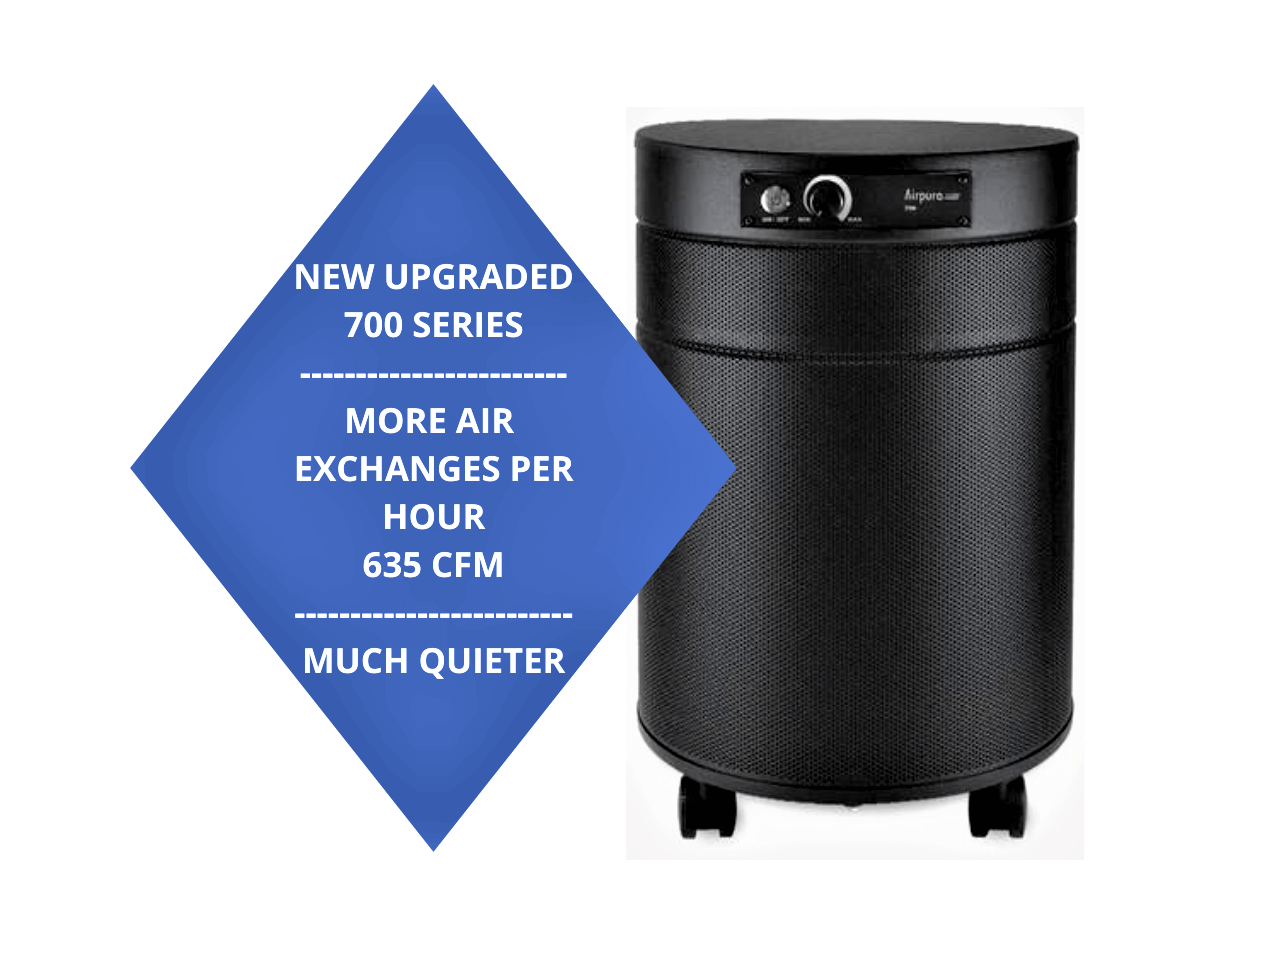 Airpura Upgraded R700 Every Day Air Purifier